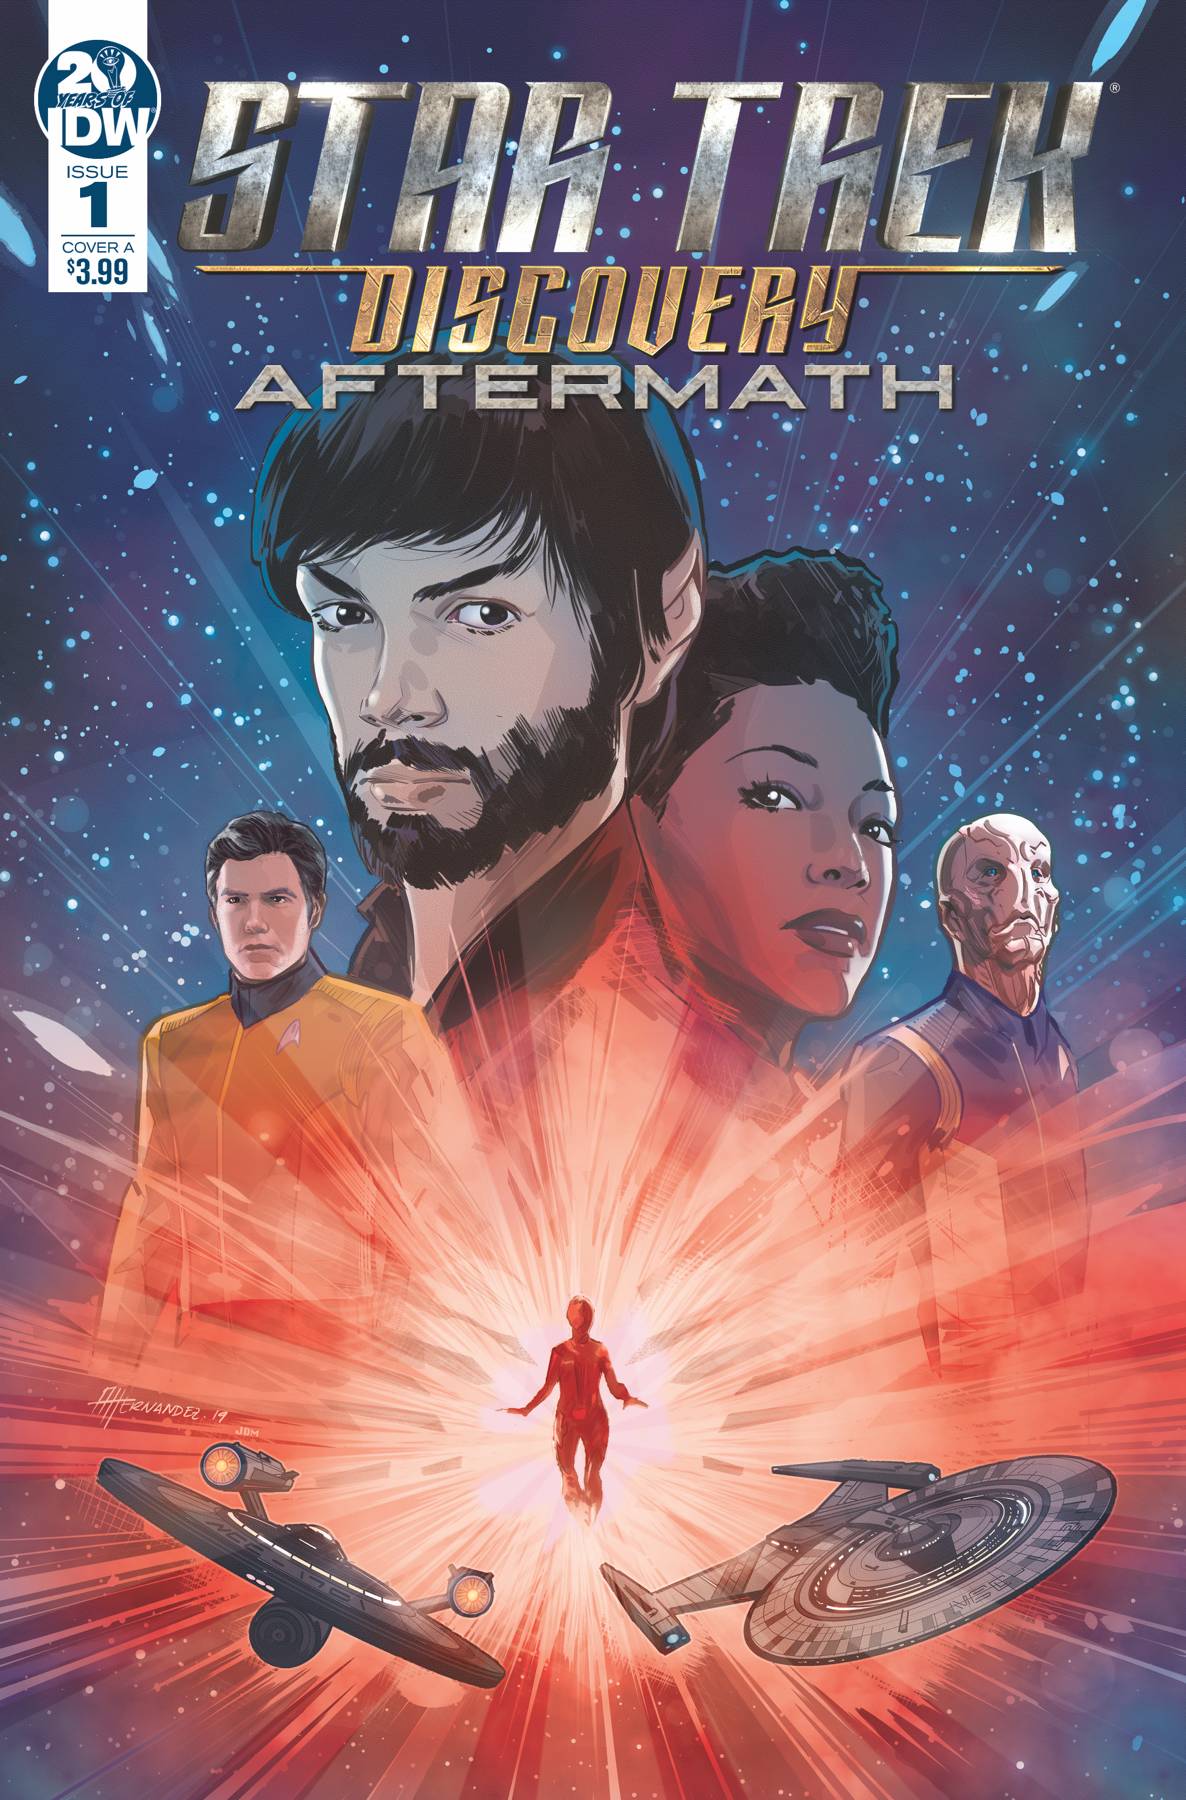 Star Trek Discovery Aftermath #1 Cover A Hernandez (Of 3)